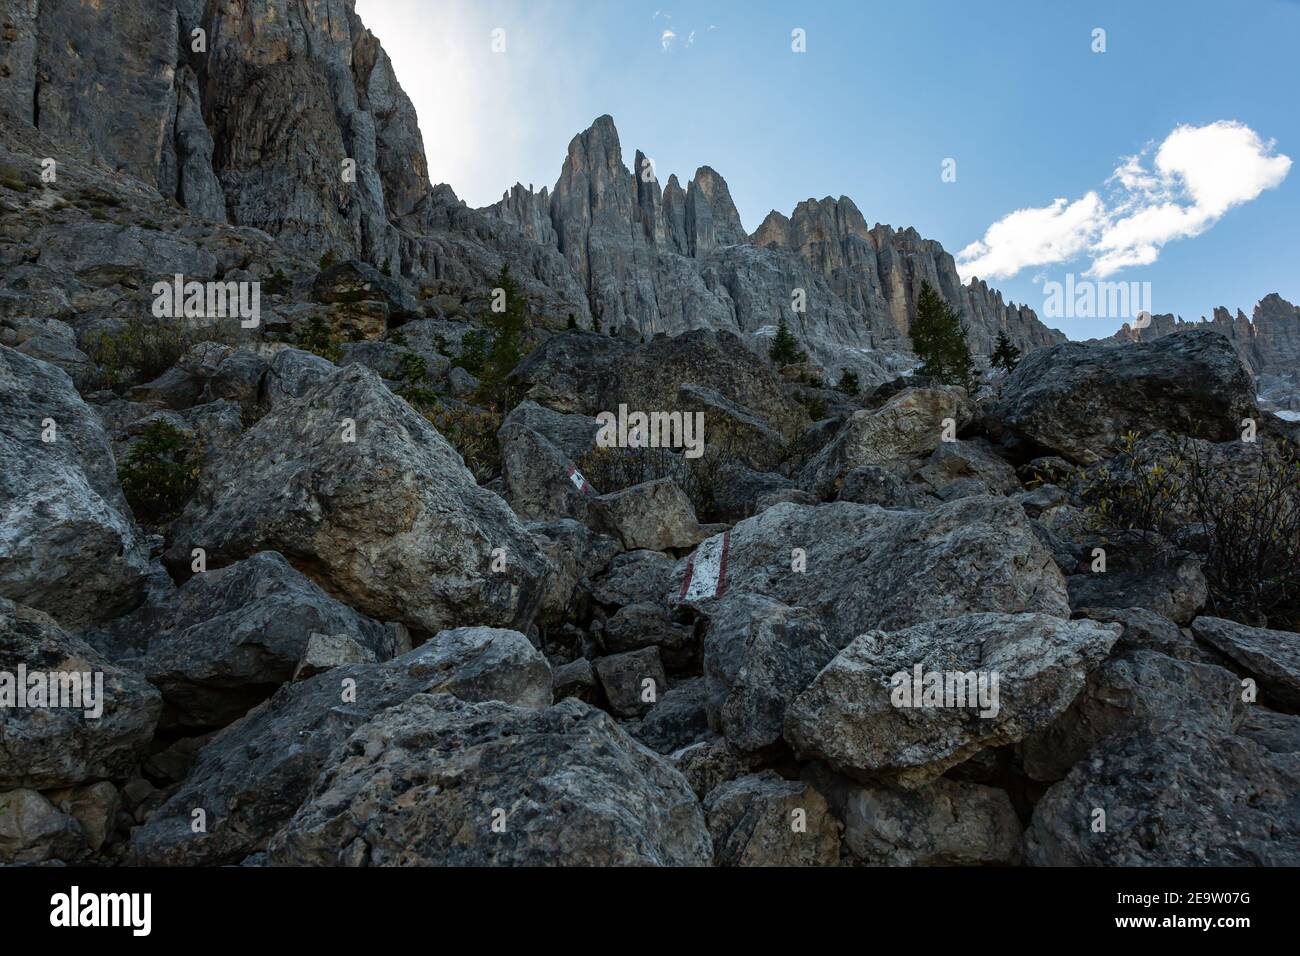 Alpine hiking path Hirzelweg crossing a boulder field with way markers, South Tyrolean Dolomites, Italy Stock Photo